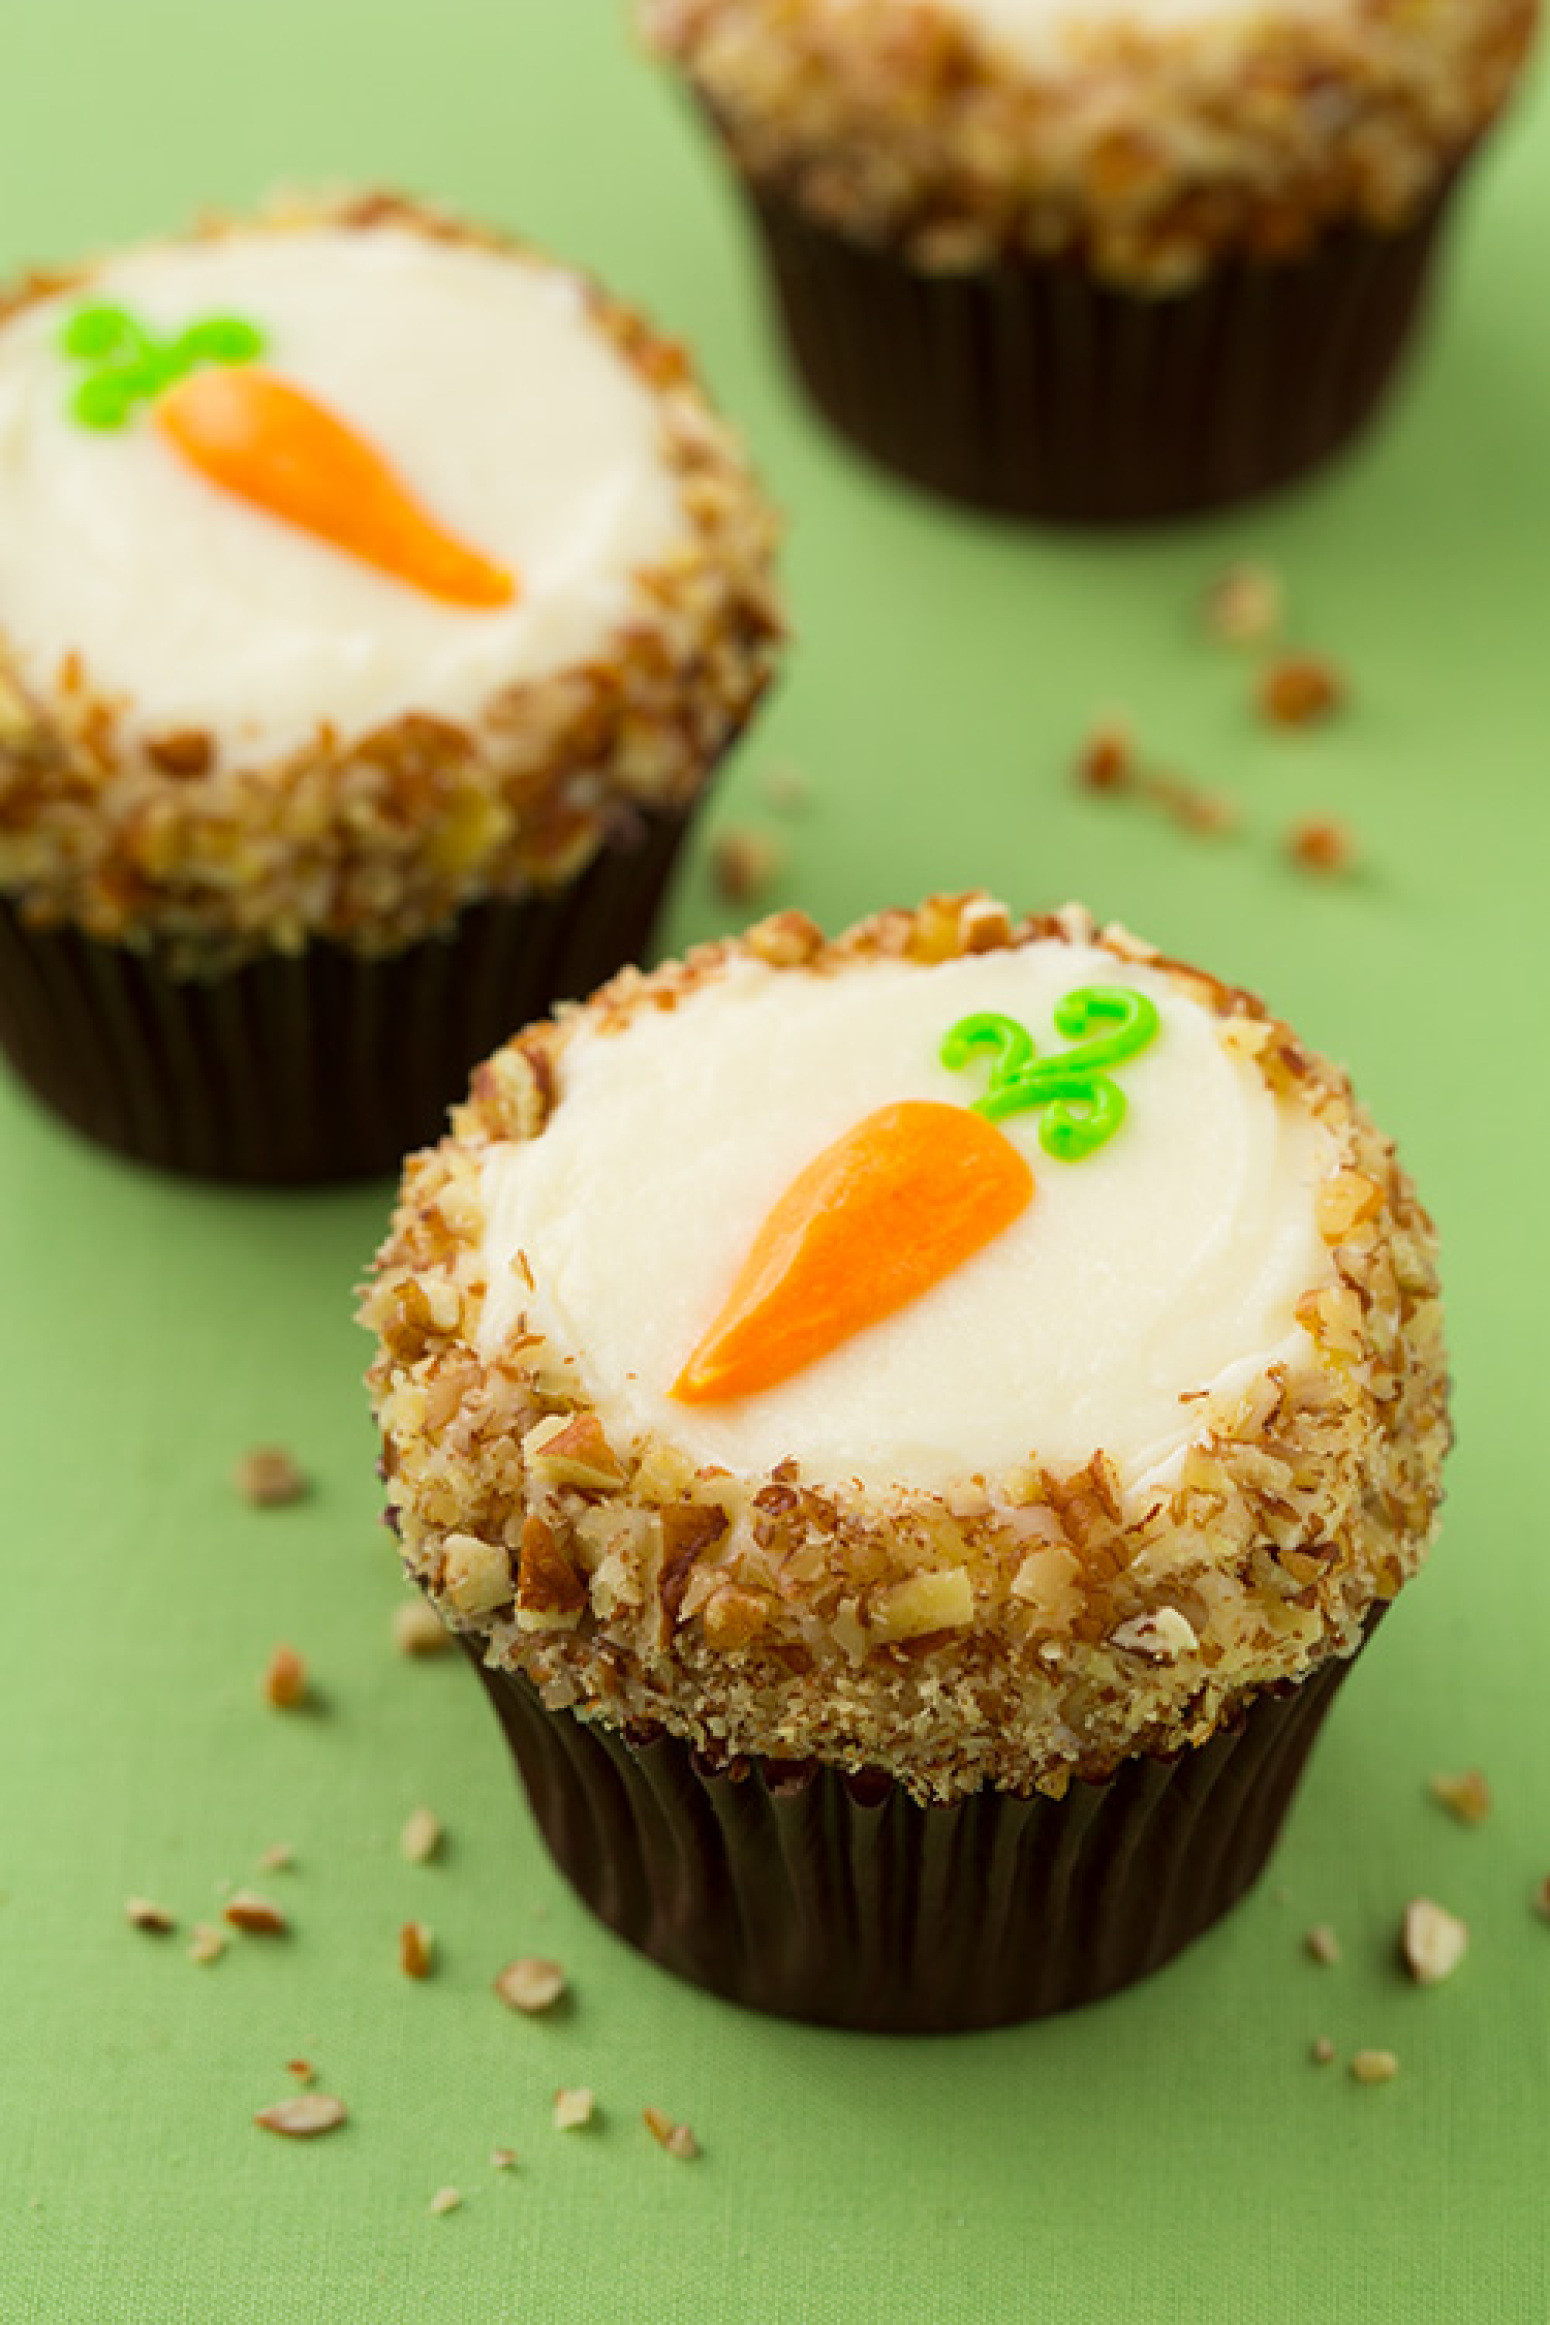 Carrot Cake Cupcakes with Cream Cheese Frosting Inspirational Carrot Cake Cupcakes with Cream Cheese Frosting Recipe 2